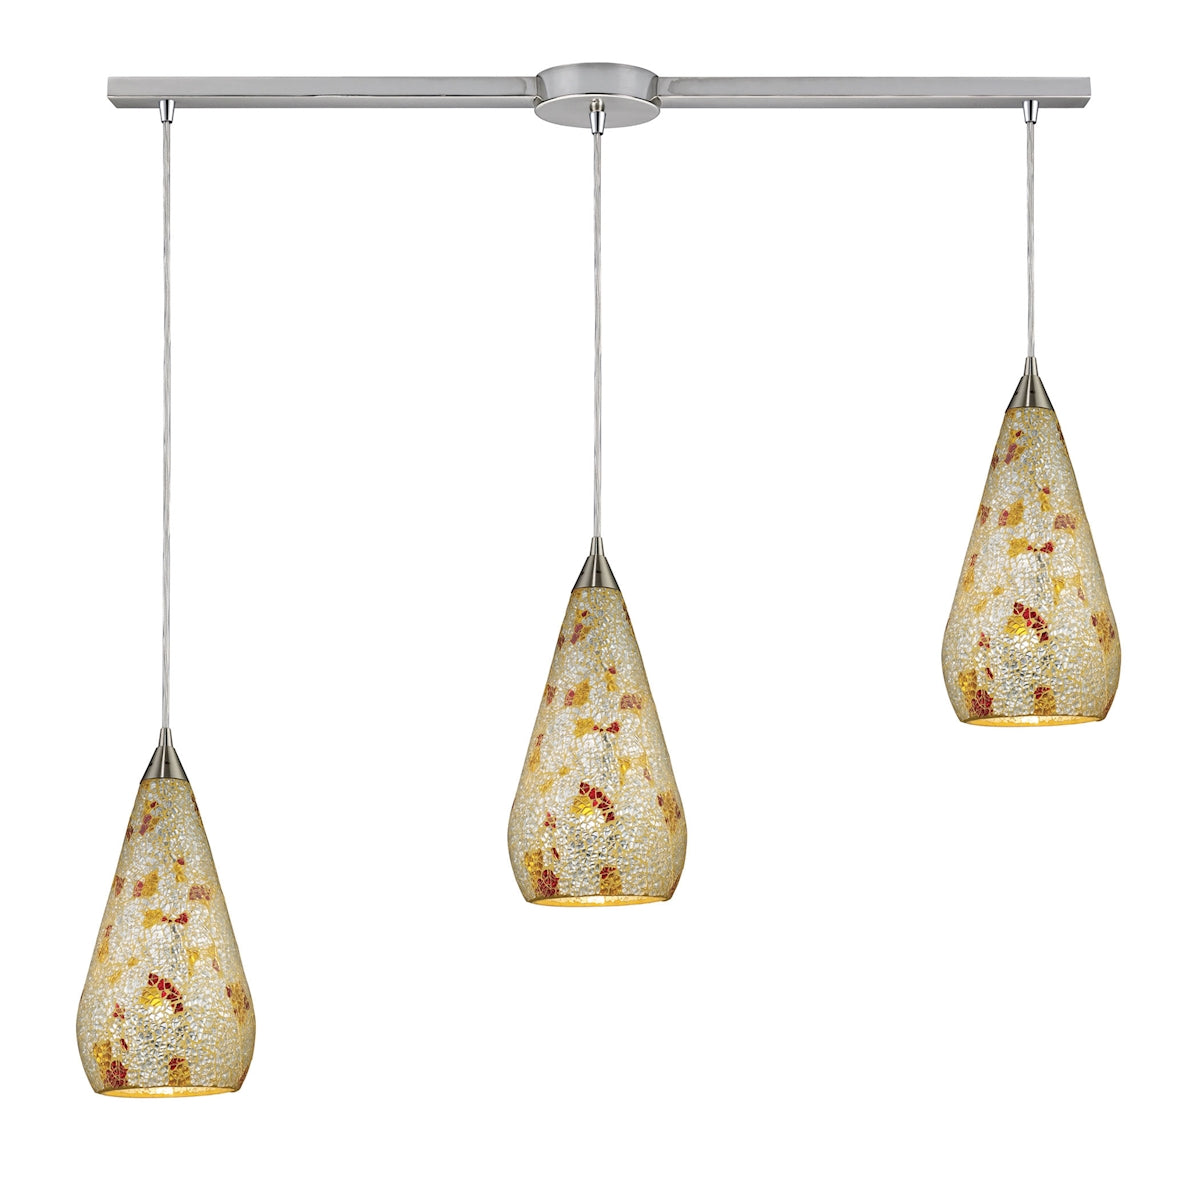 ELK Lighting 546-3L-SLVM-CRC Curvalo 3-Light Linear Pendant Fixture in Satin Nickel with Silver Multi Crackle Glass